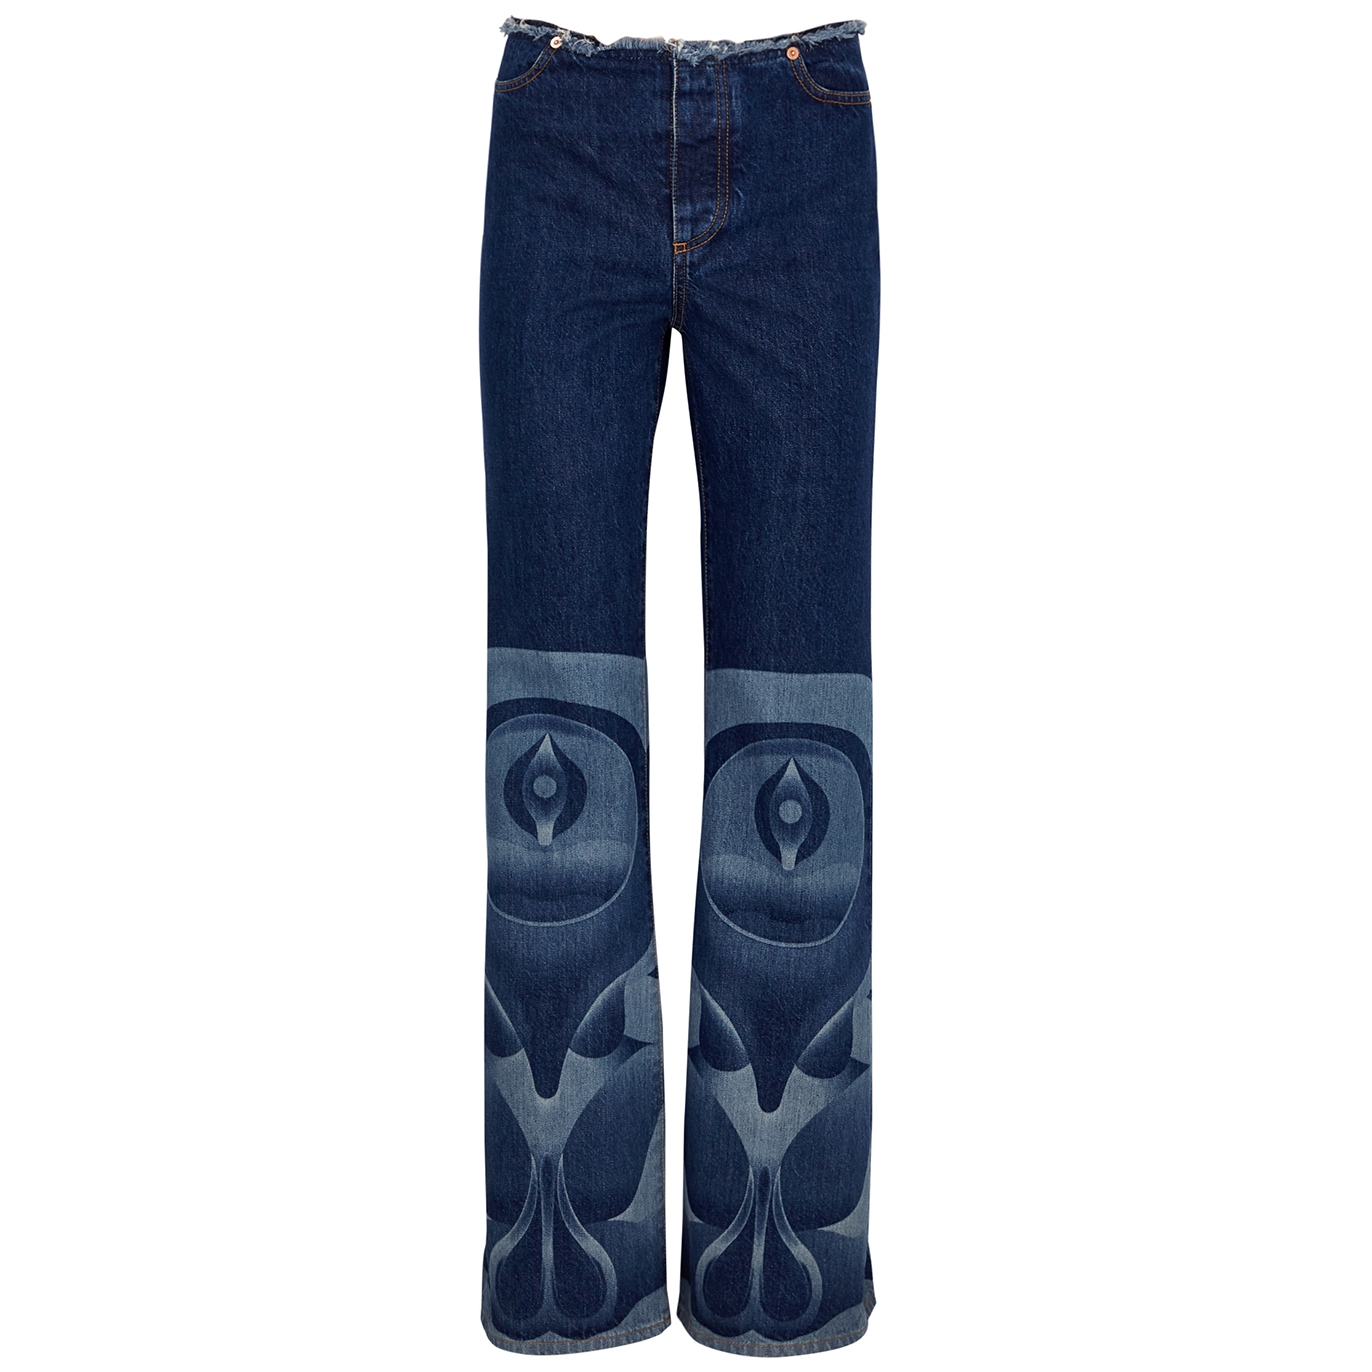 Conner Ives Printed Bootcut Jeans